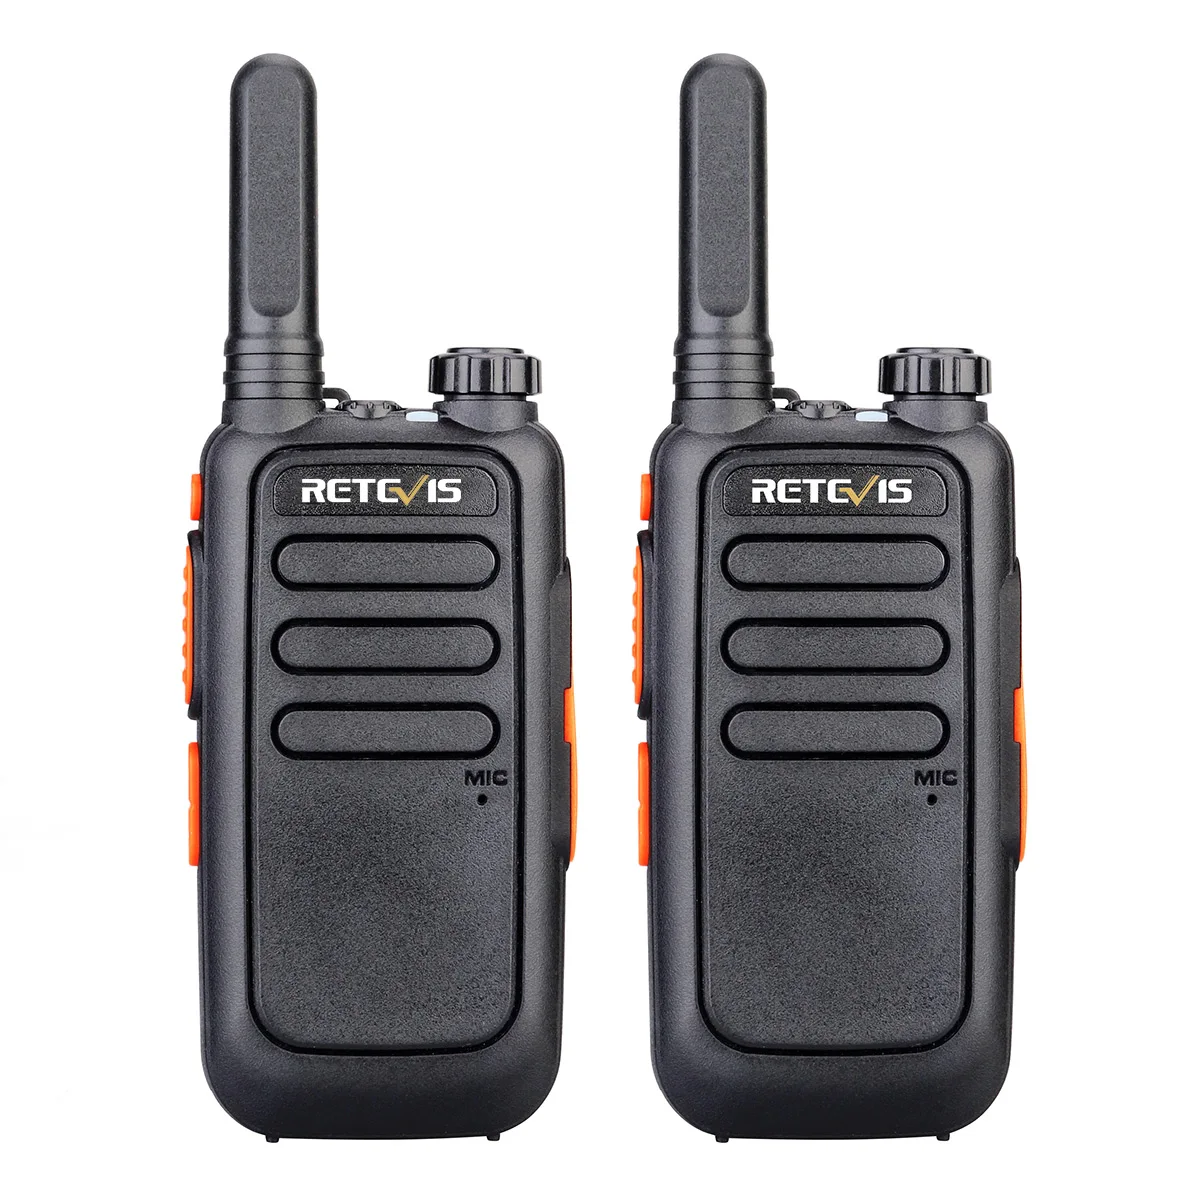 

Cheap License free walkie talkie Retevis RT69 2W CTCSS/DCS TOT VOX Scan FRS Two Way Radio For USA Canada